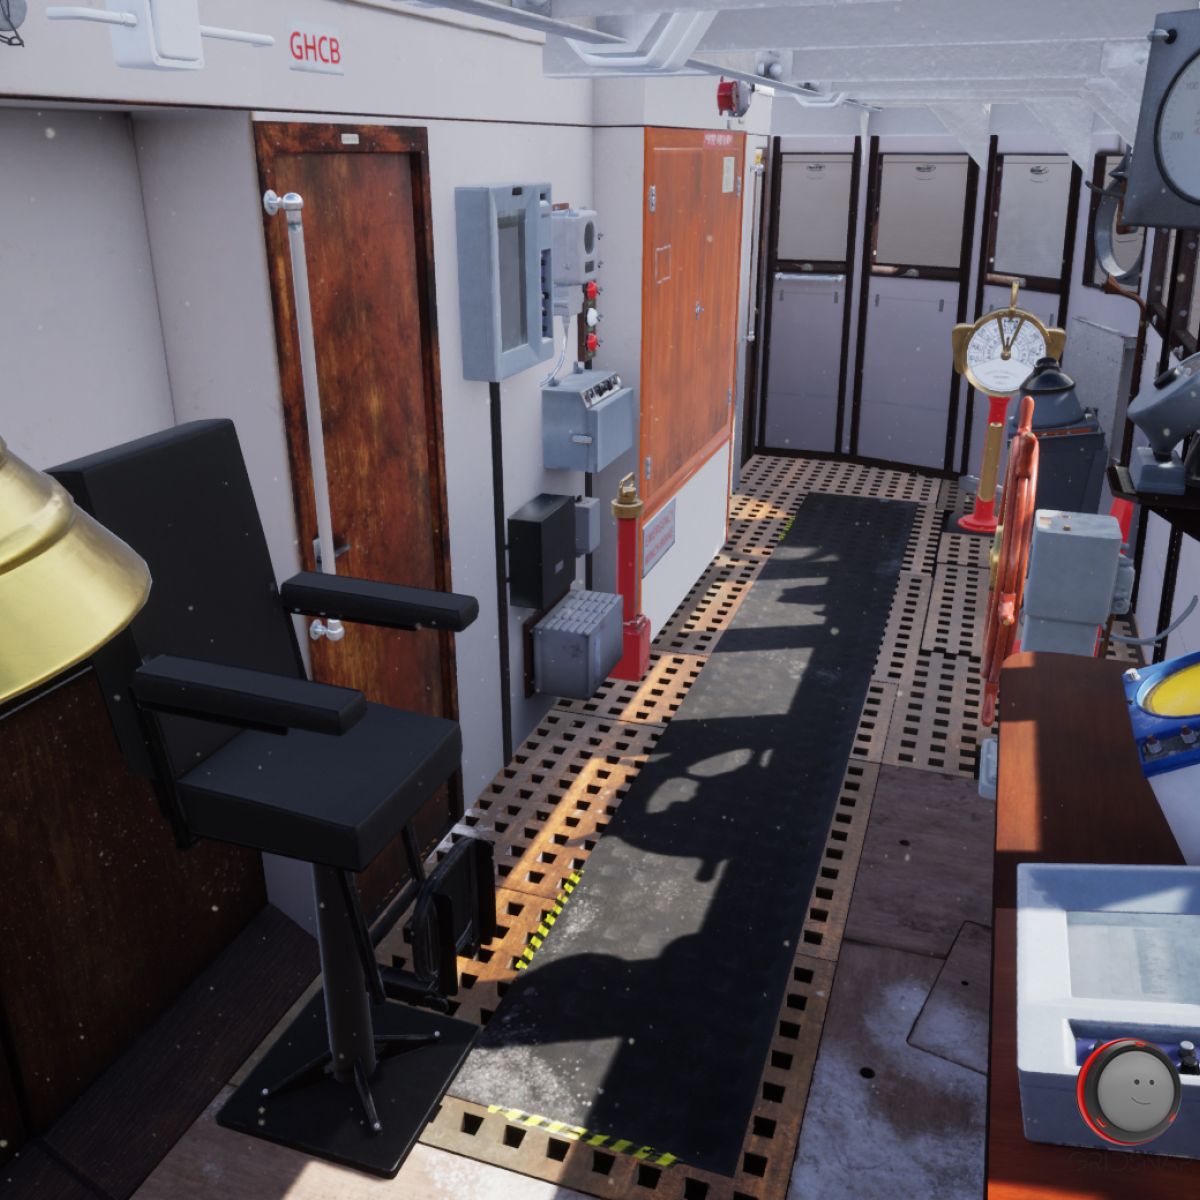 The VR experience will feel like you're actually standing on the ship